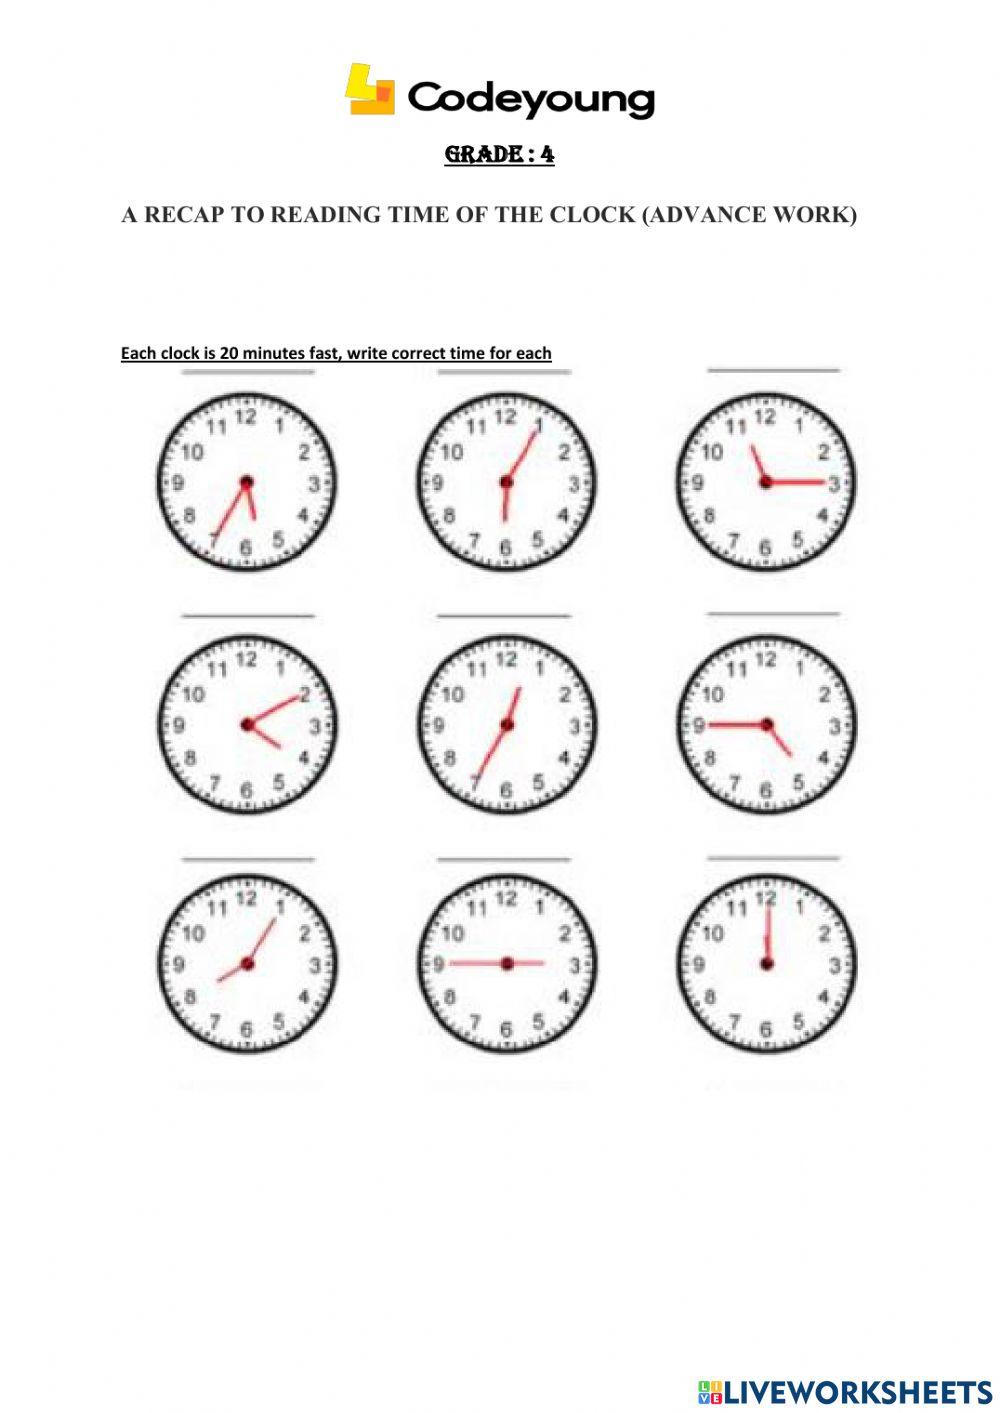 A recap to reading time of the clock (advance work)